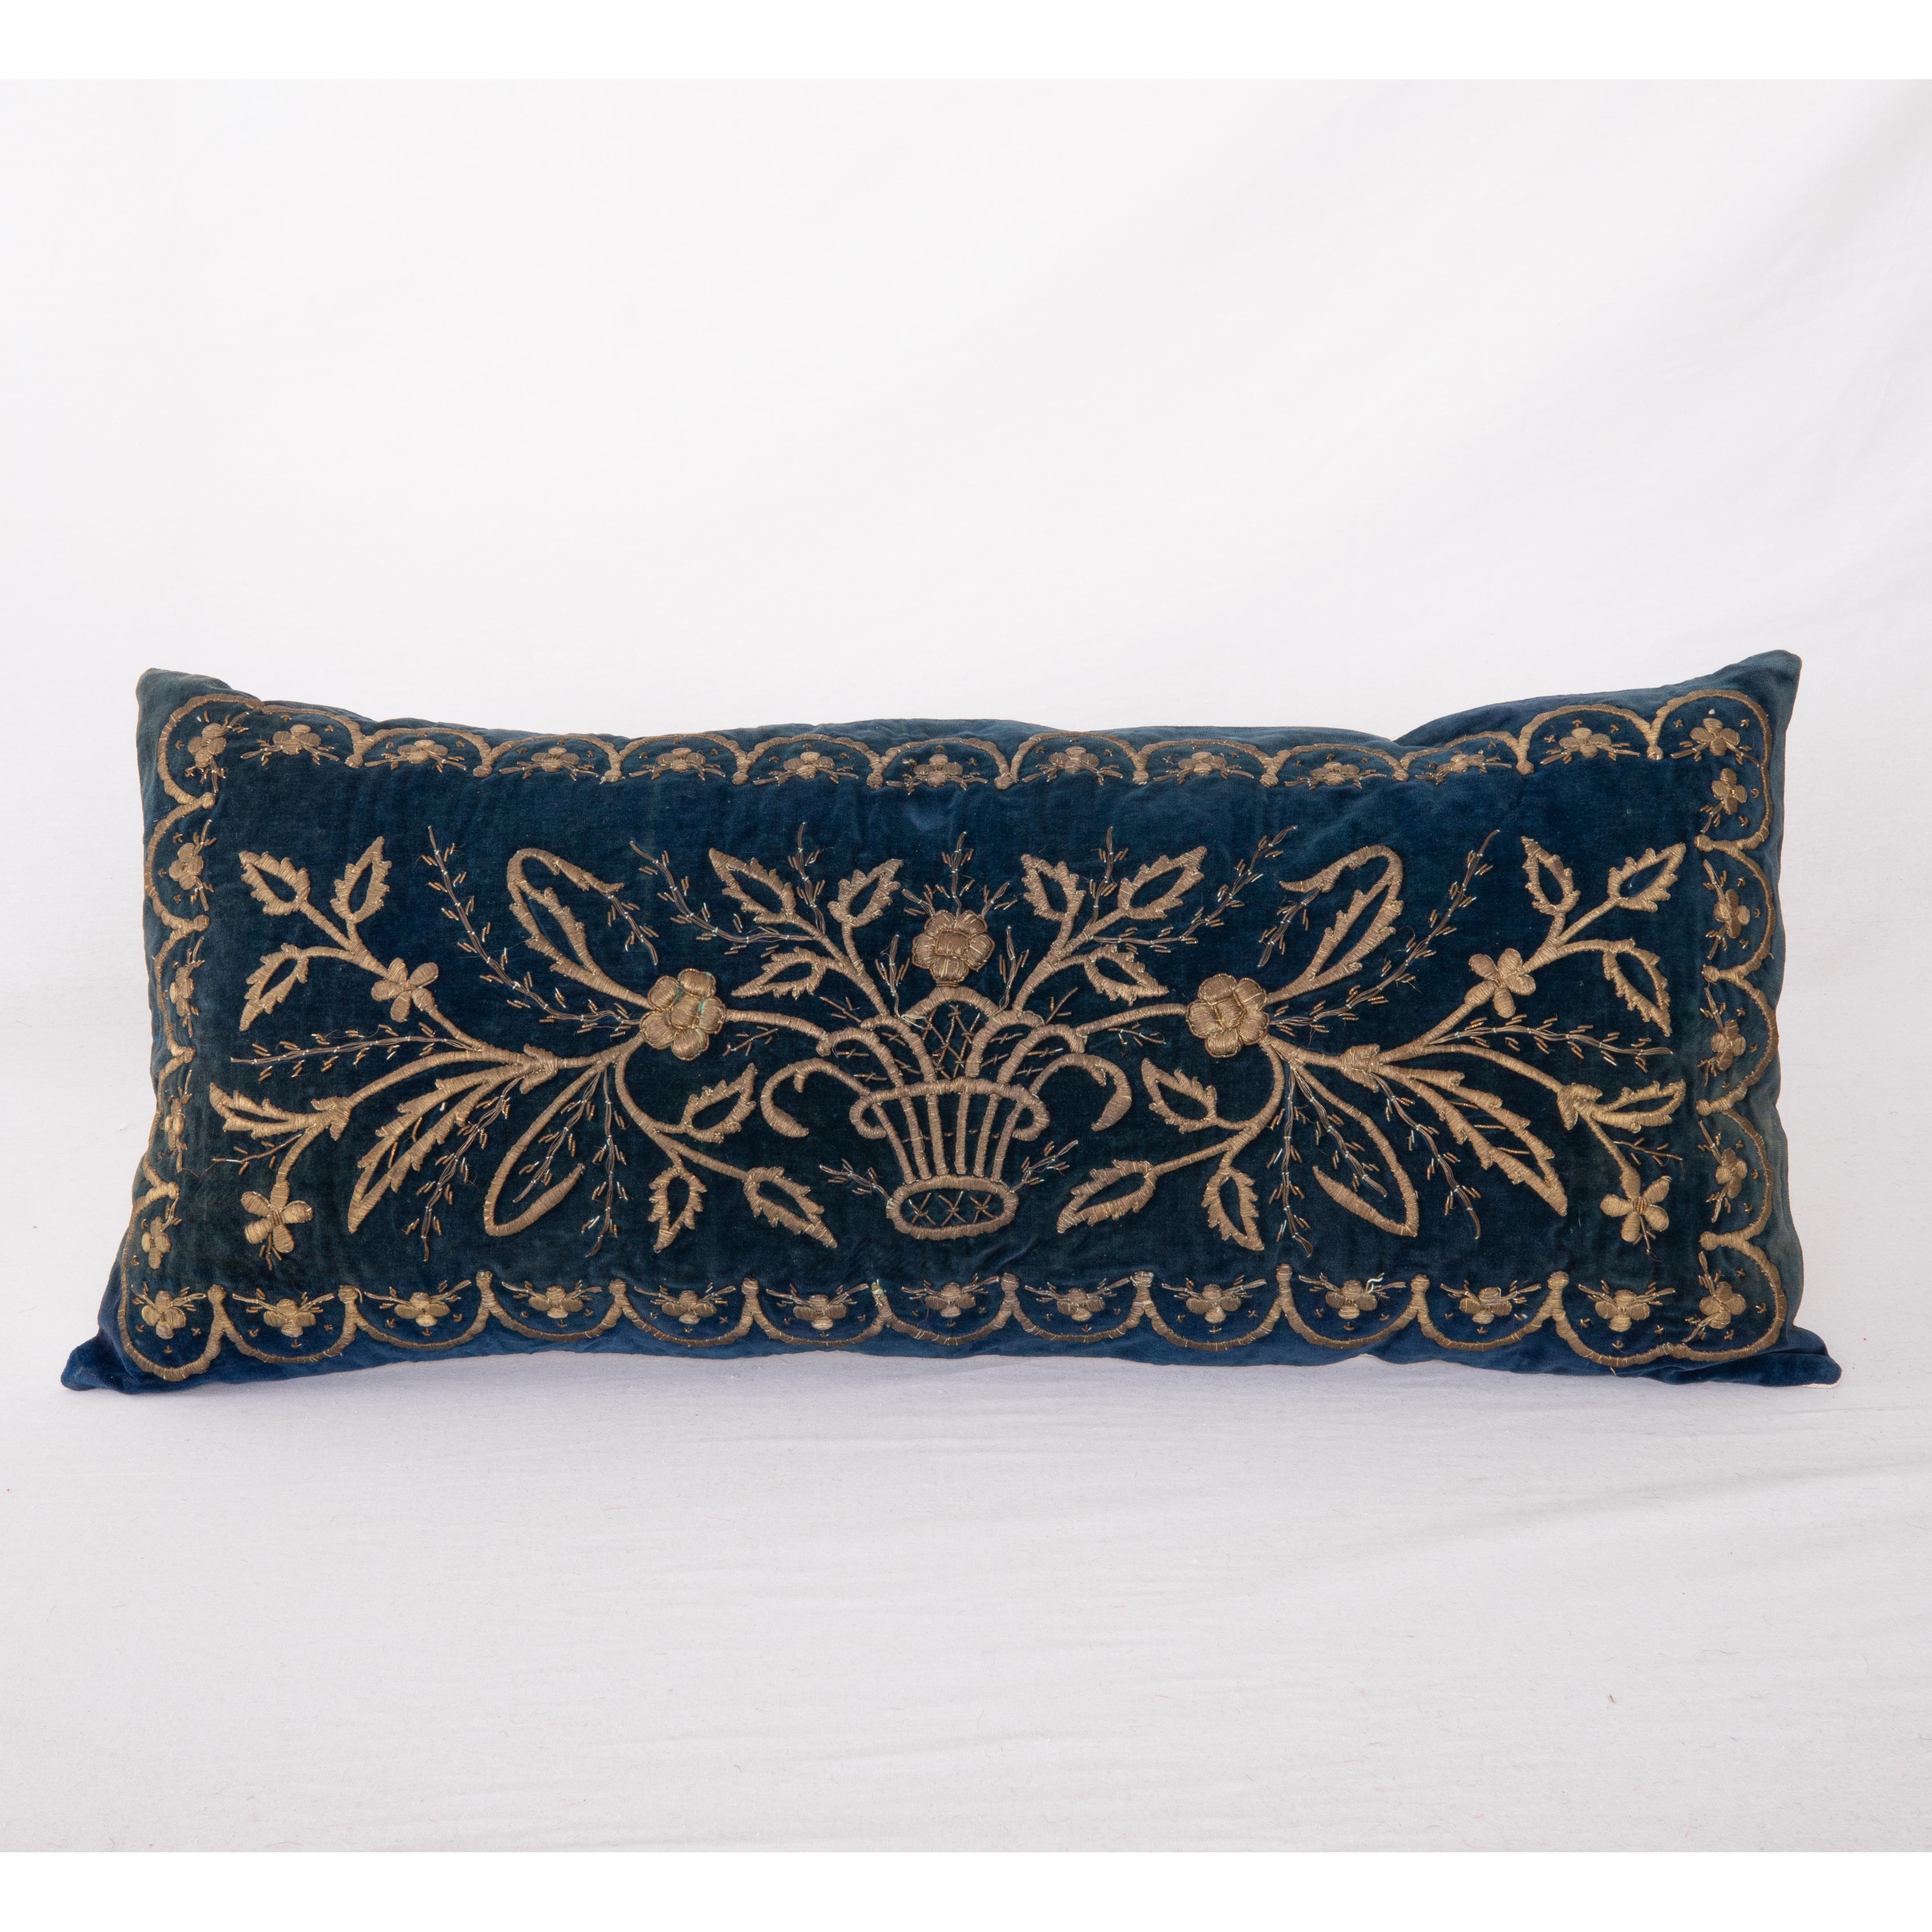 It does not come with an insert but a bag made to the size to accommodate insert materials.
Linen in the back.
Zipper closure.
Dry Cleaning is reccommended.

Antique Ottoman sarma embroidery is a type of embroidery that originated in the